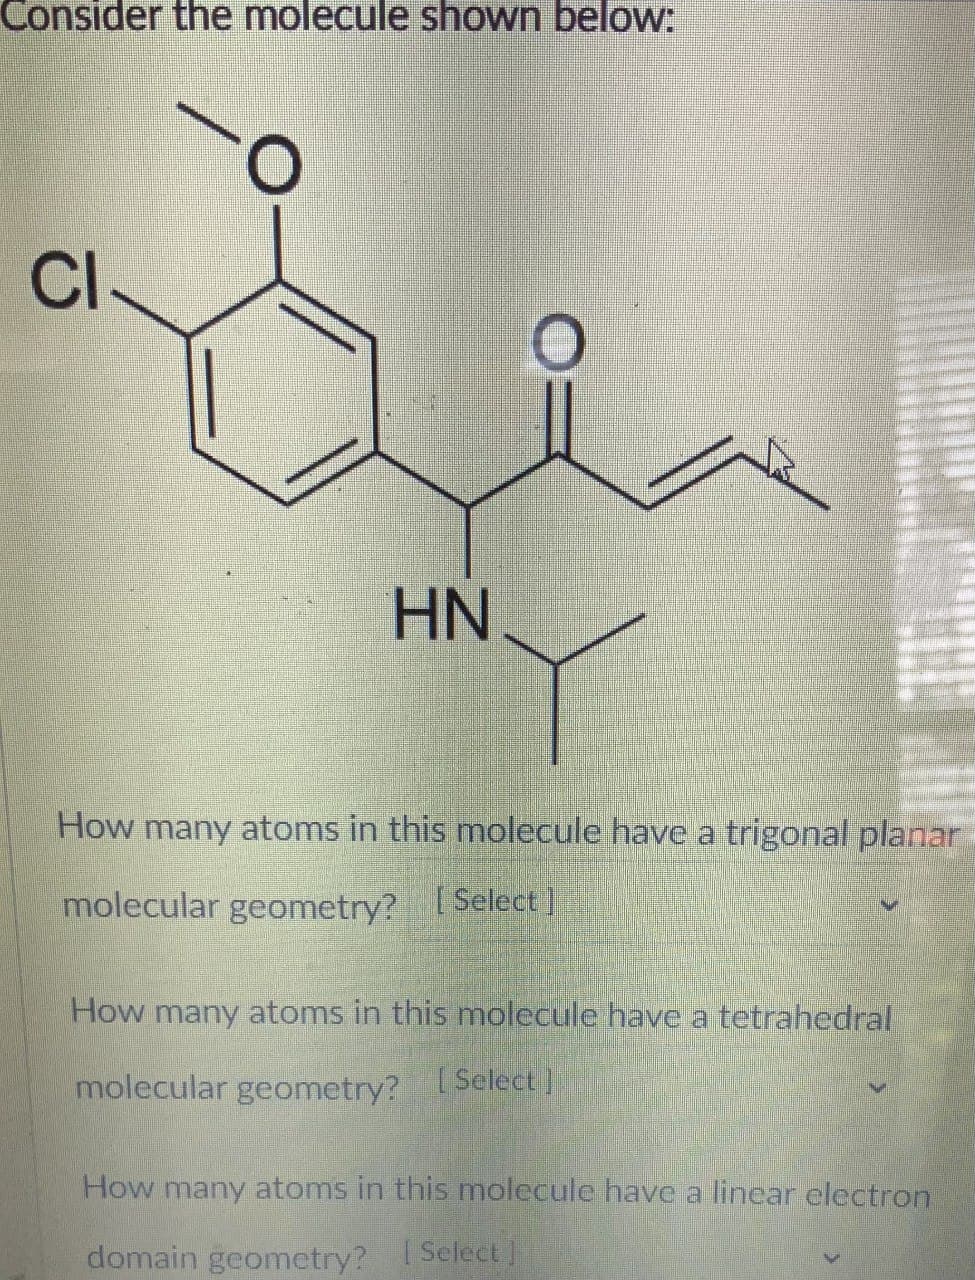 Consider the molecule shown below:
CI.
HN
How many atoms in this molecule have a trigonal planar
molecular geometry? [Select]
How many atoms in this molecule have a tetrahedral
molecular geometry? [Select]
How many atoms in this molecule have a linear electron
domain geometry? [Select]